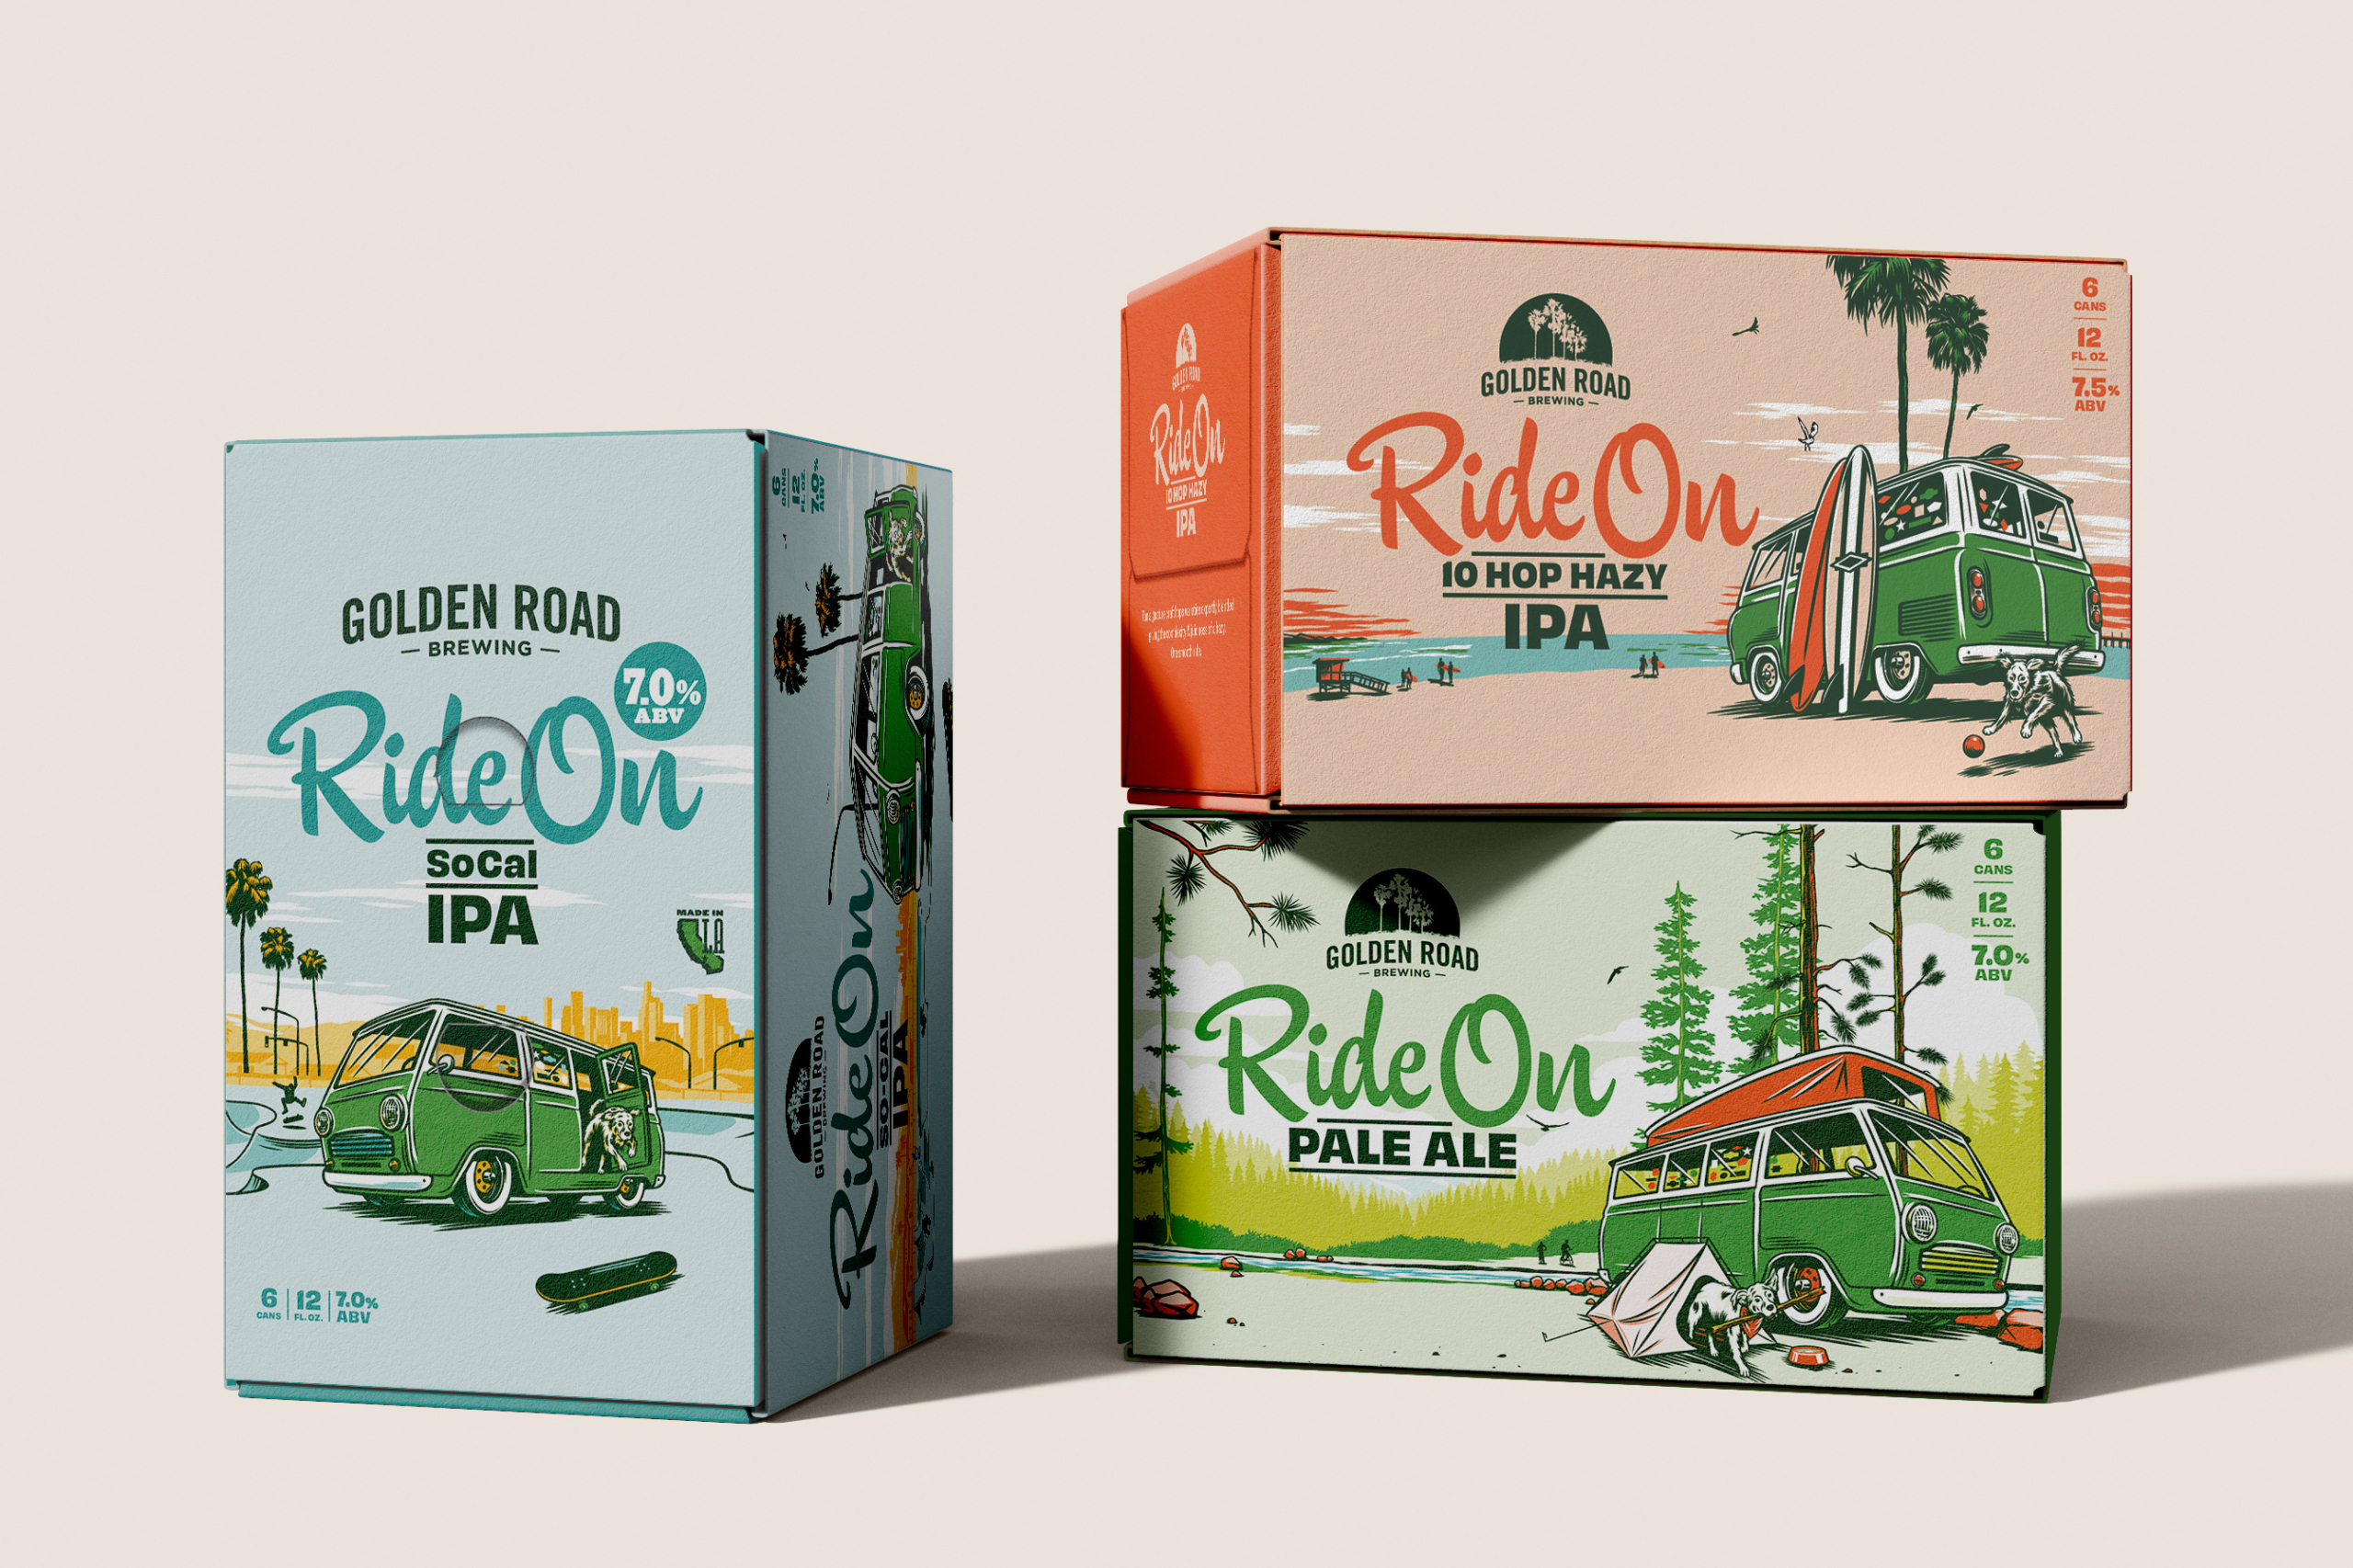 Three cases of Golden Road Ride On beer sit on a neutral beige background. Each shows the same vintage green van parked in various outdoor locations around the state of California: a skate park, beach, and the mountains. The cases are blue for SoCal IPA, pink for 10 Hop Hazy IPA, and green for Pale Ale.